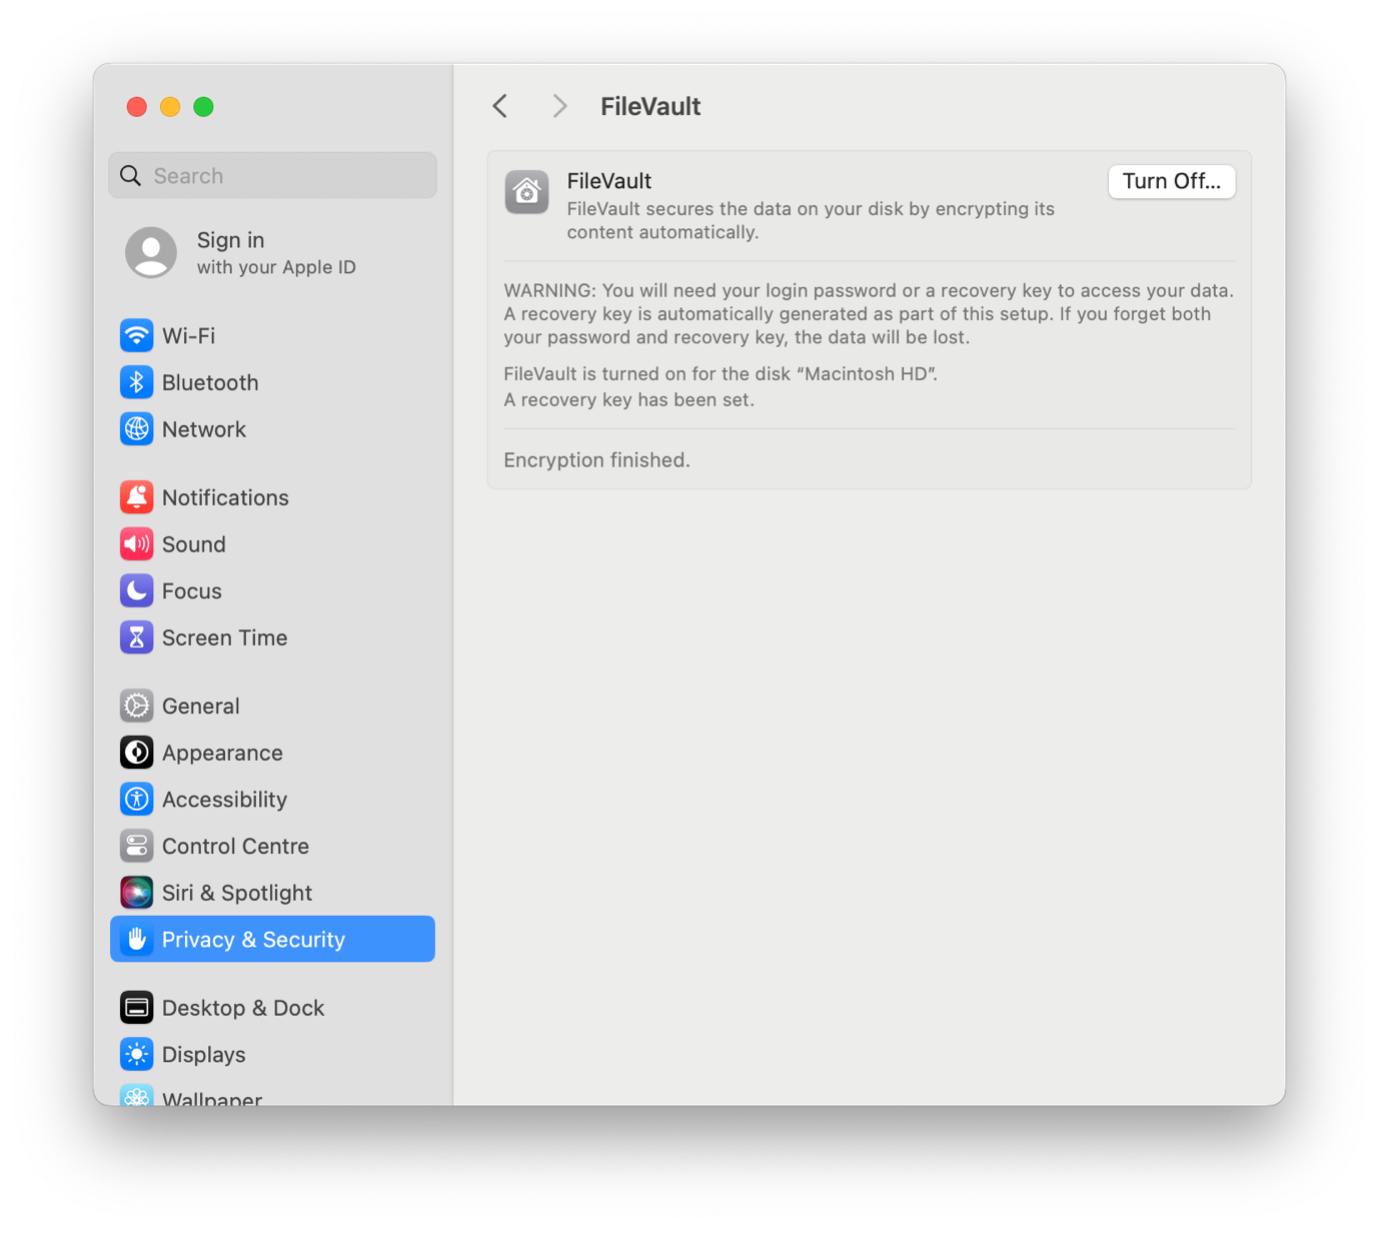 The FileVault menu in 'Privacy & Security' showing that FileVault is switched on.